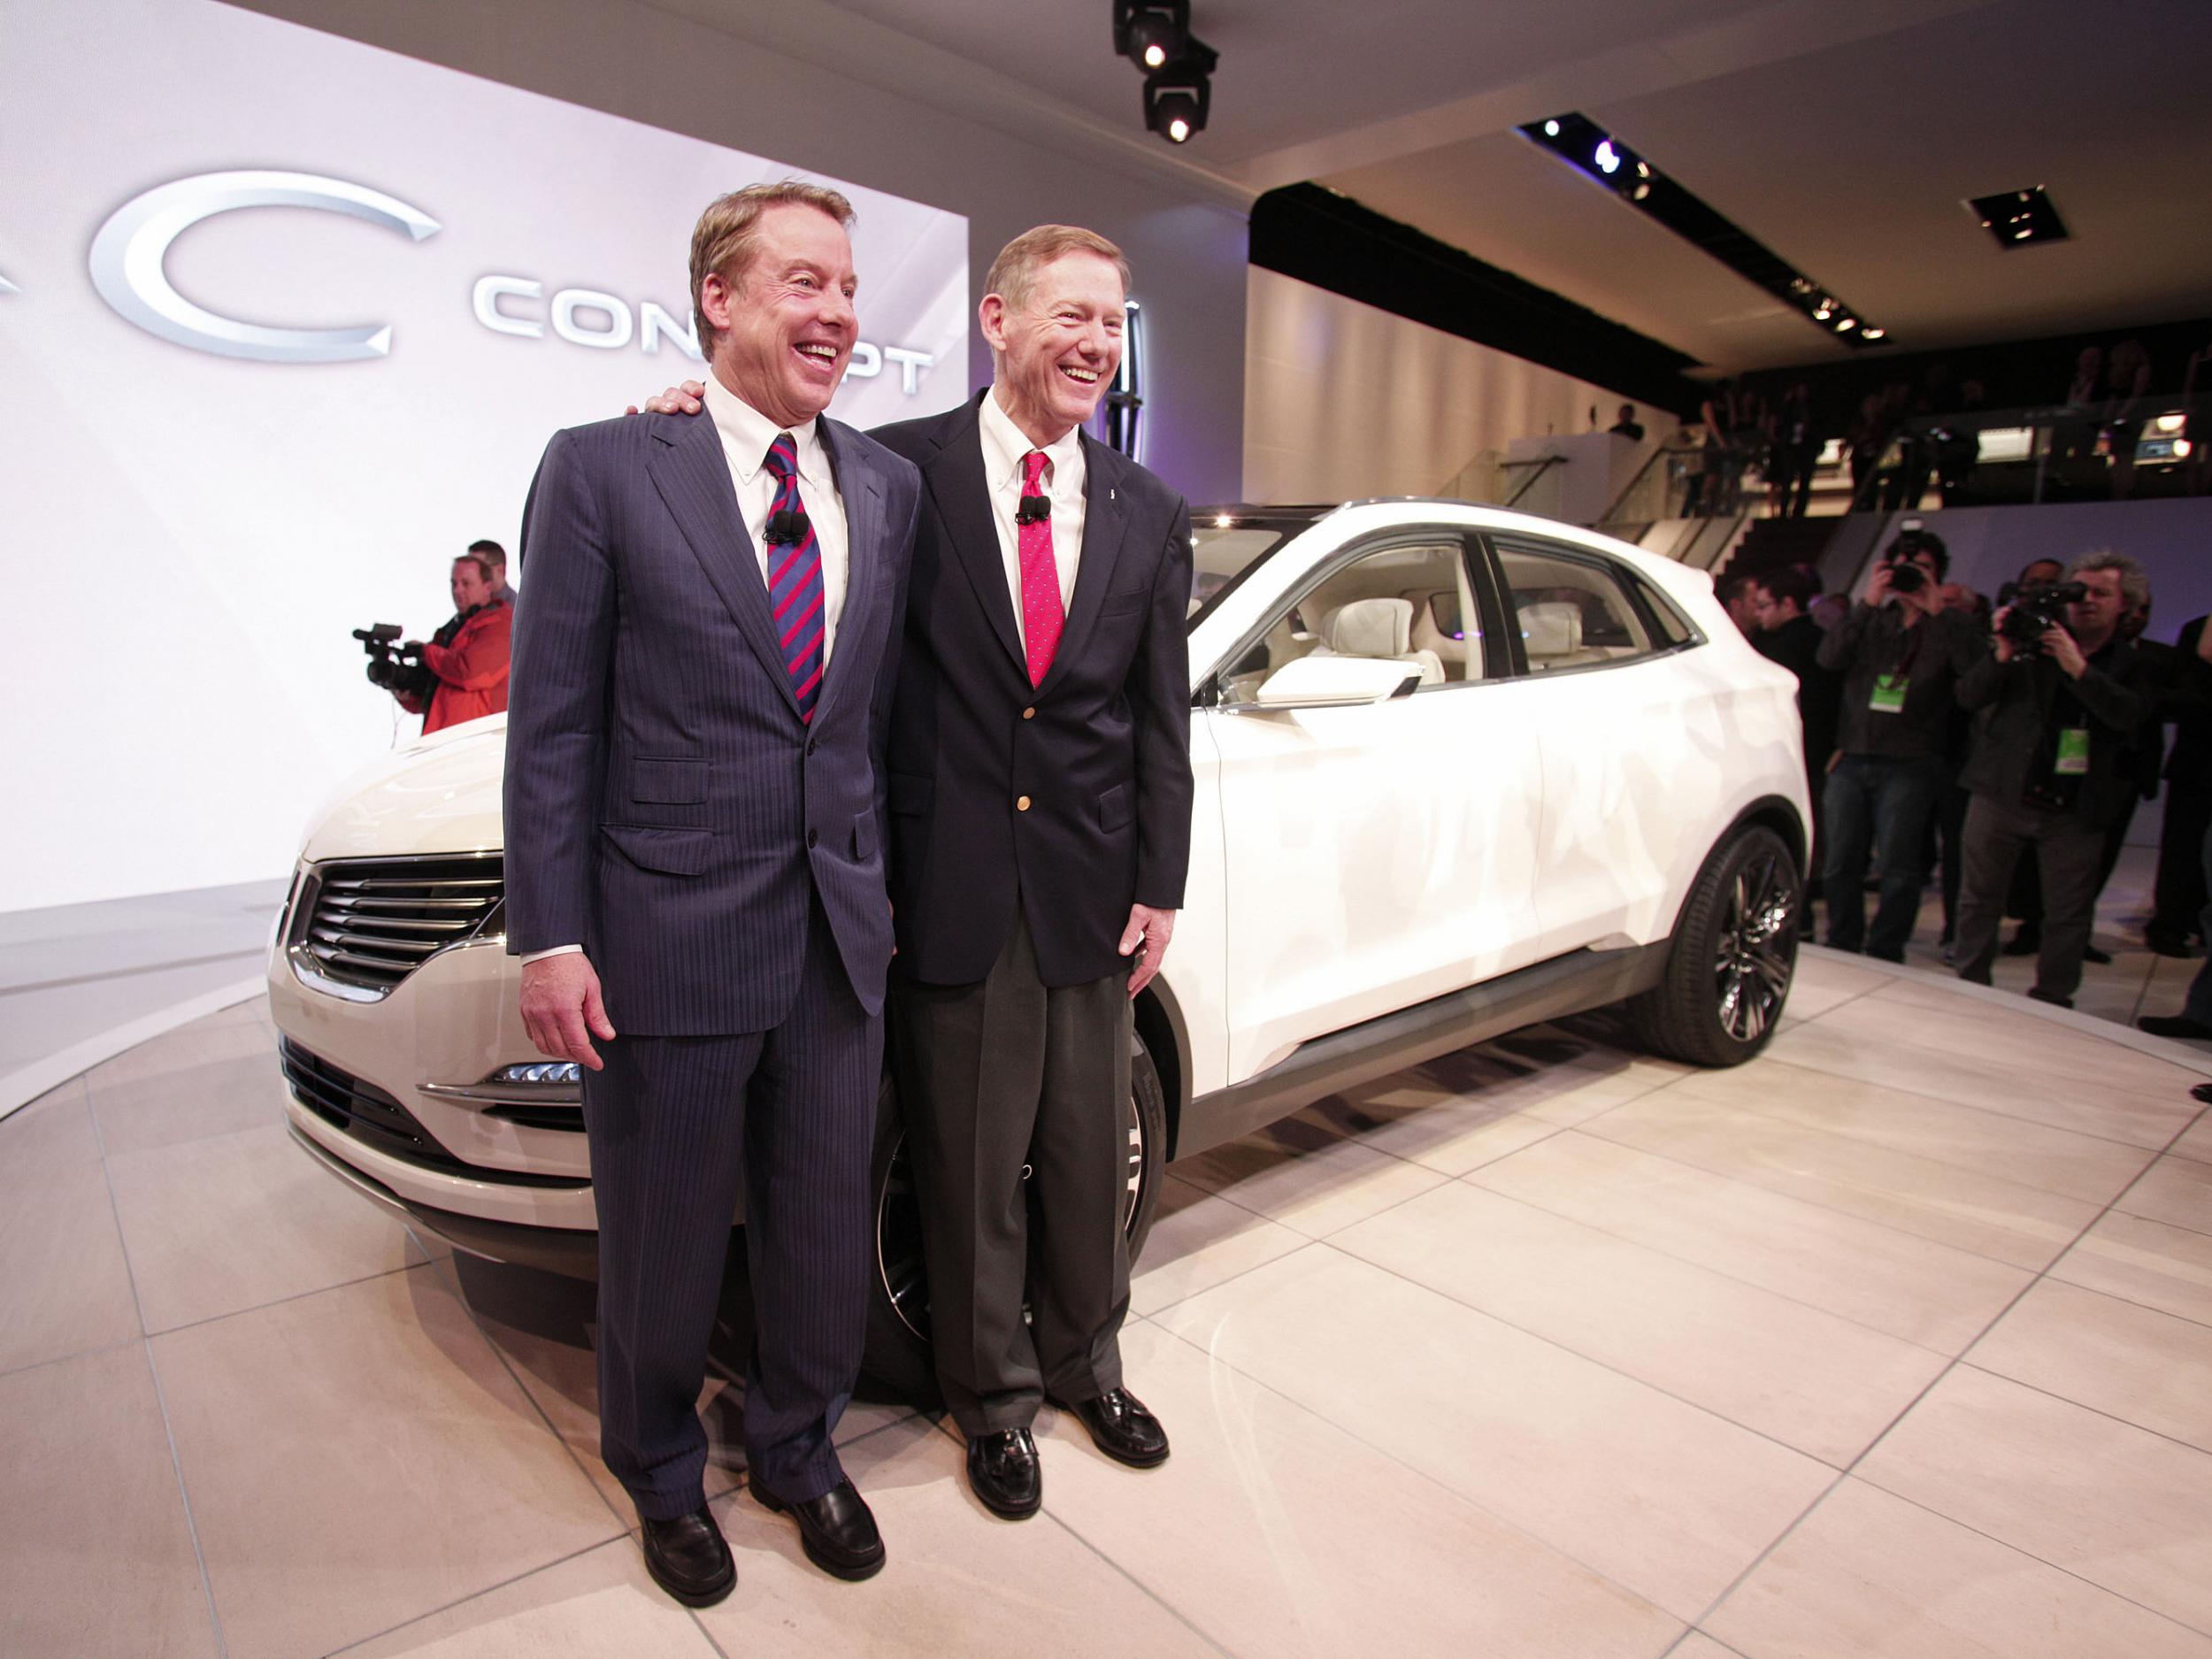 Ford Motor Company chairman Bill Ford (L) and CEO Alan Mulally (R) pose with the Lincoln MKC vehicle at a car show in 2013. Mr Ford confirmed that production of the MKC in Kentucky would not be moving to Mexico, but Donald Trump took credit for saving the entire 'Lincoln plant'.